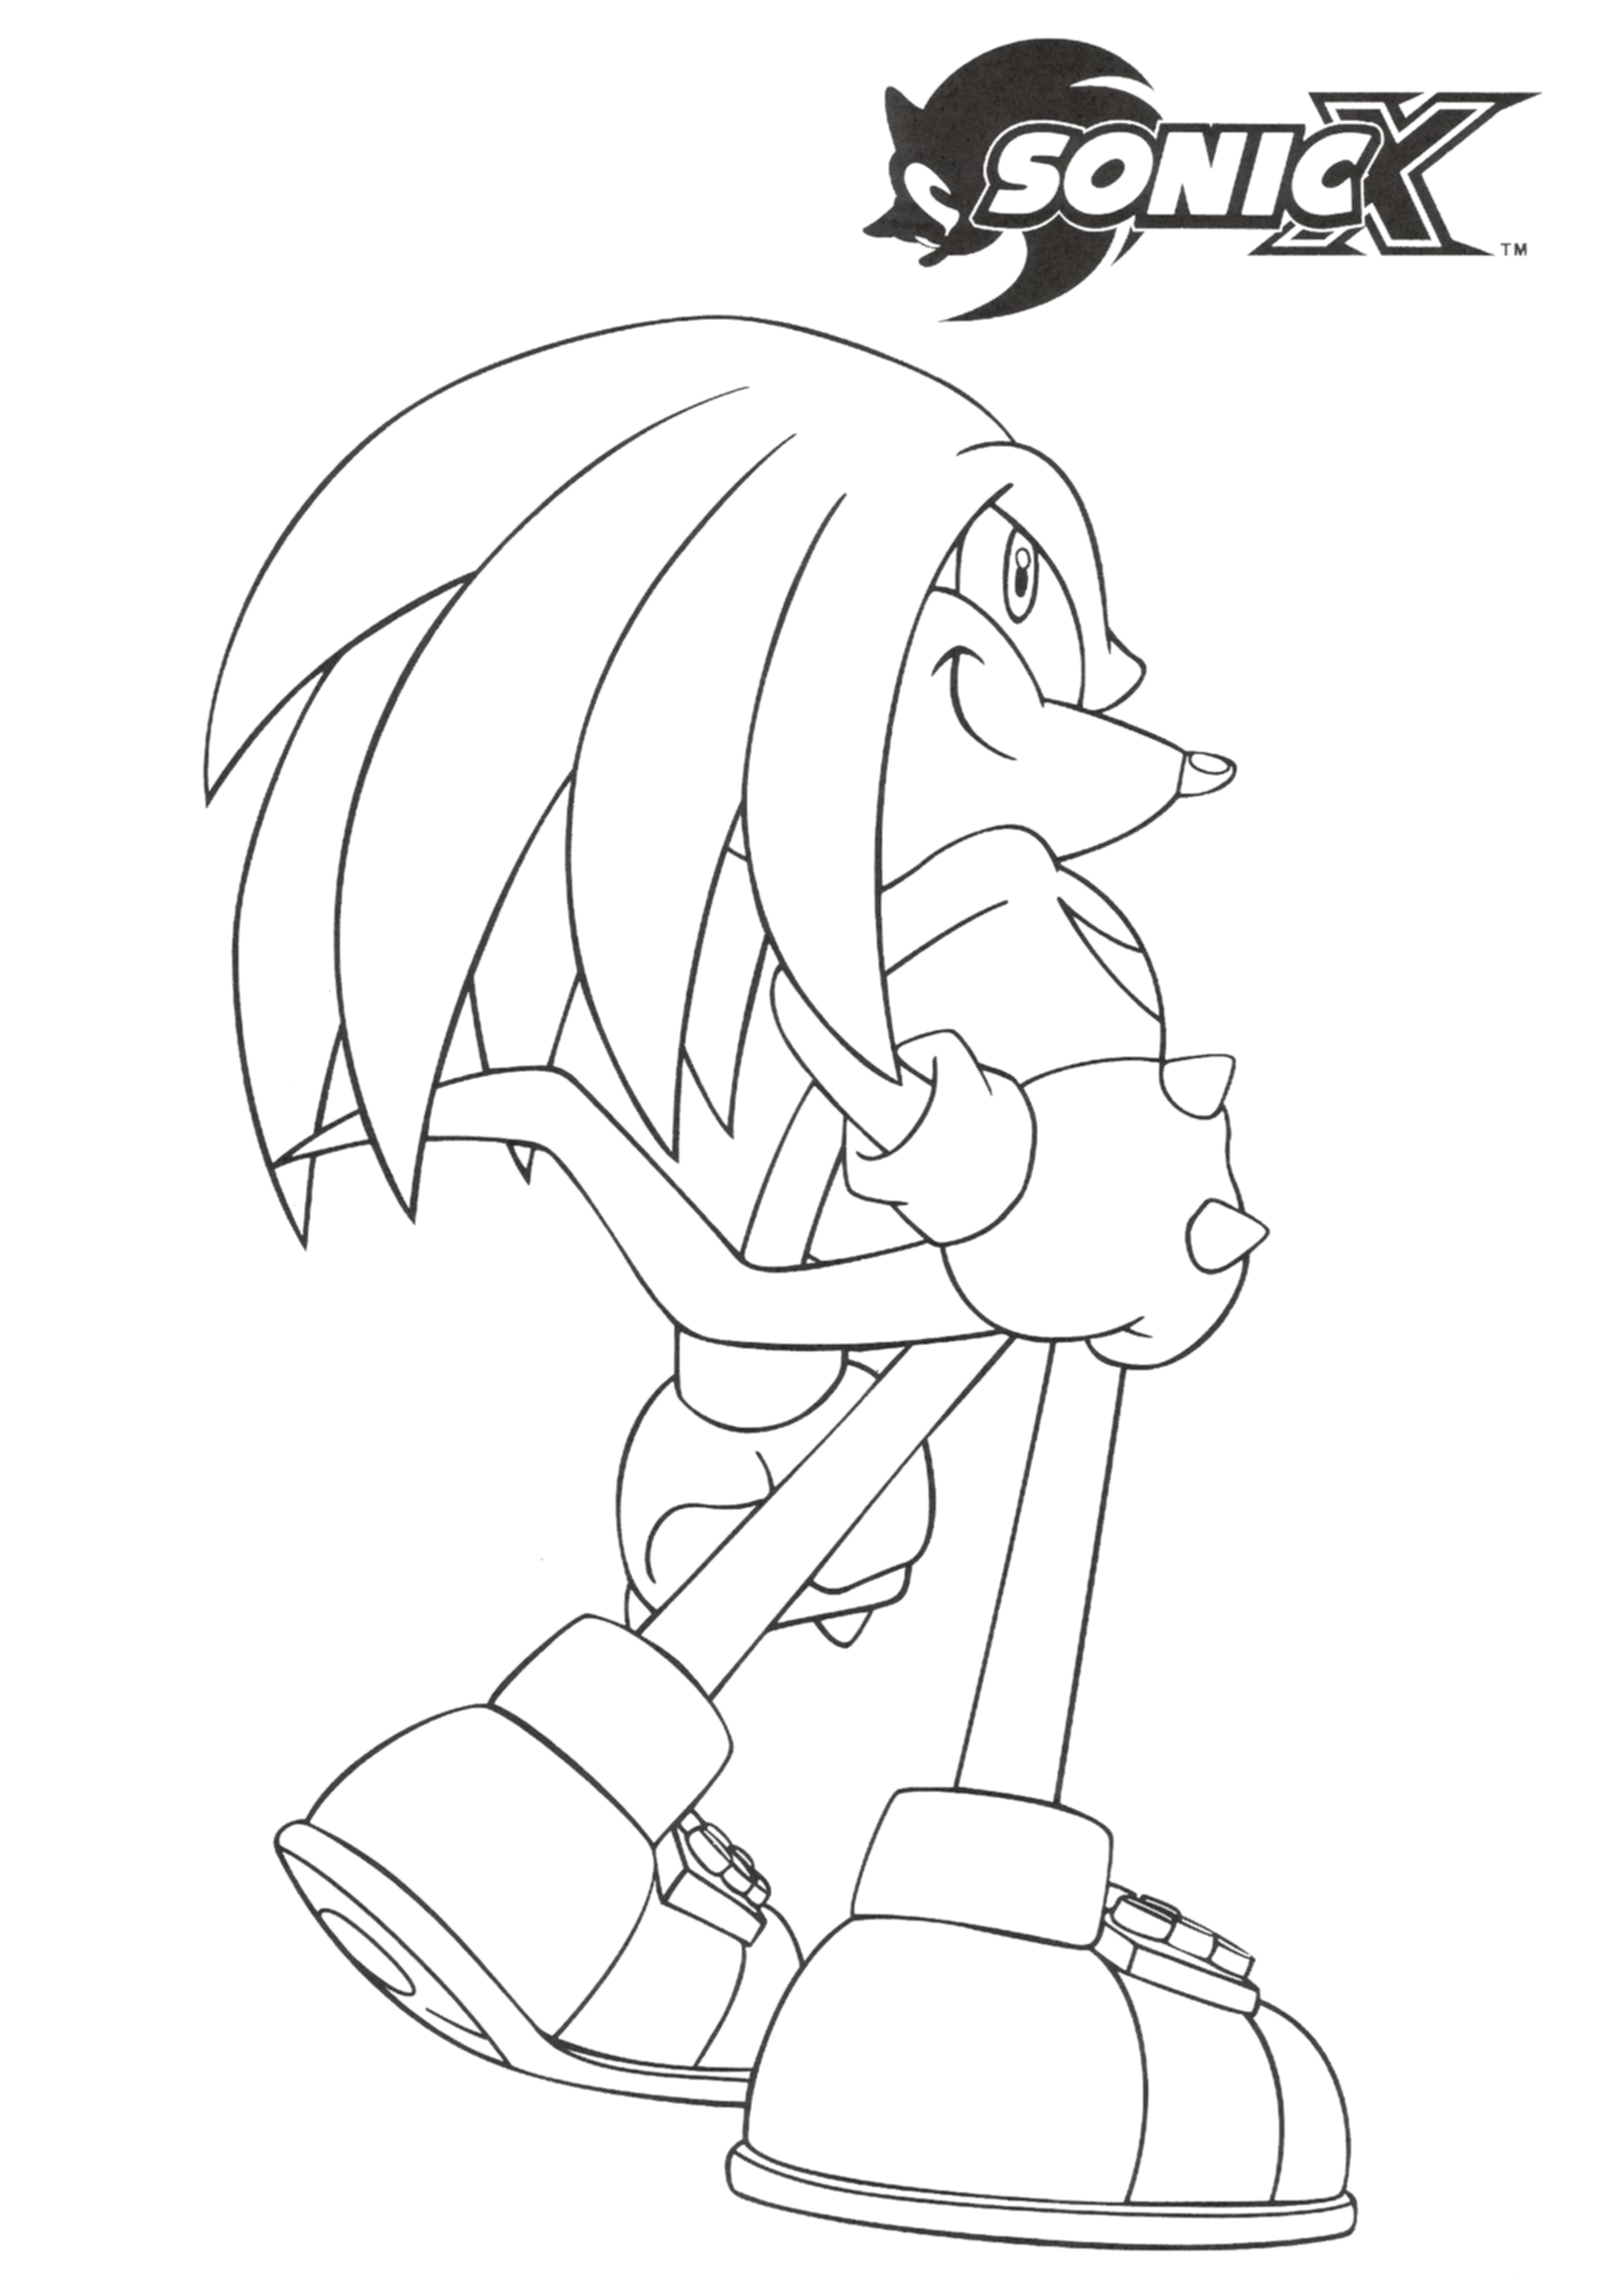 Knuckle the Echidna - Coloring Pages for kids - SheetalColor.com